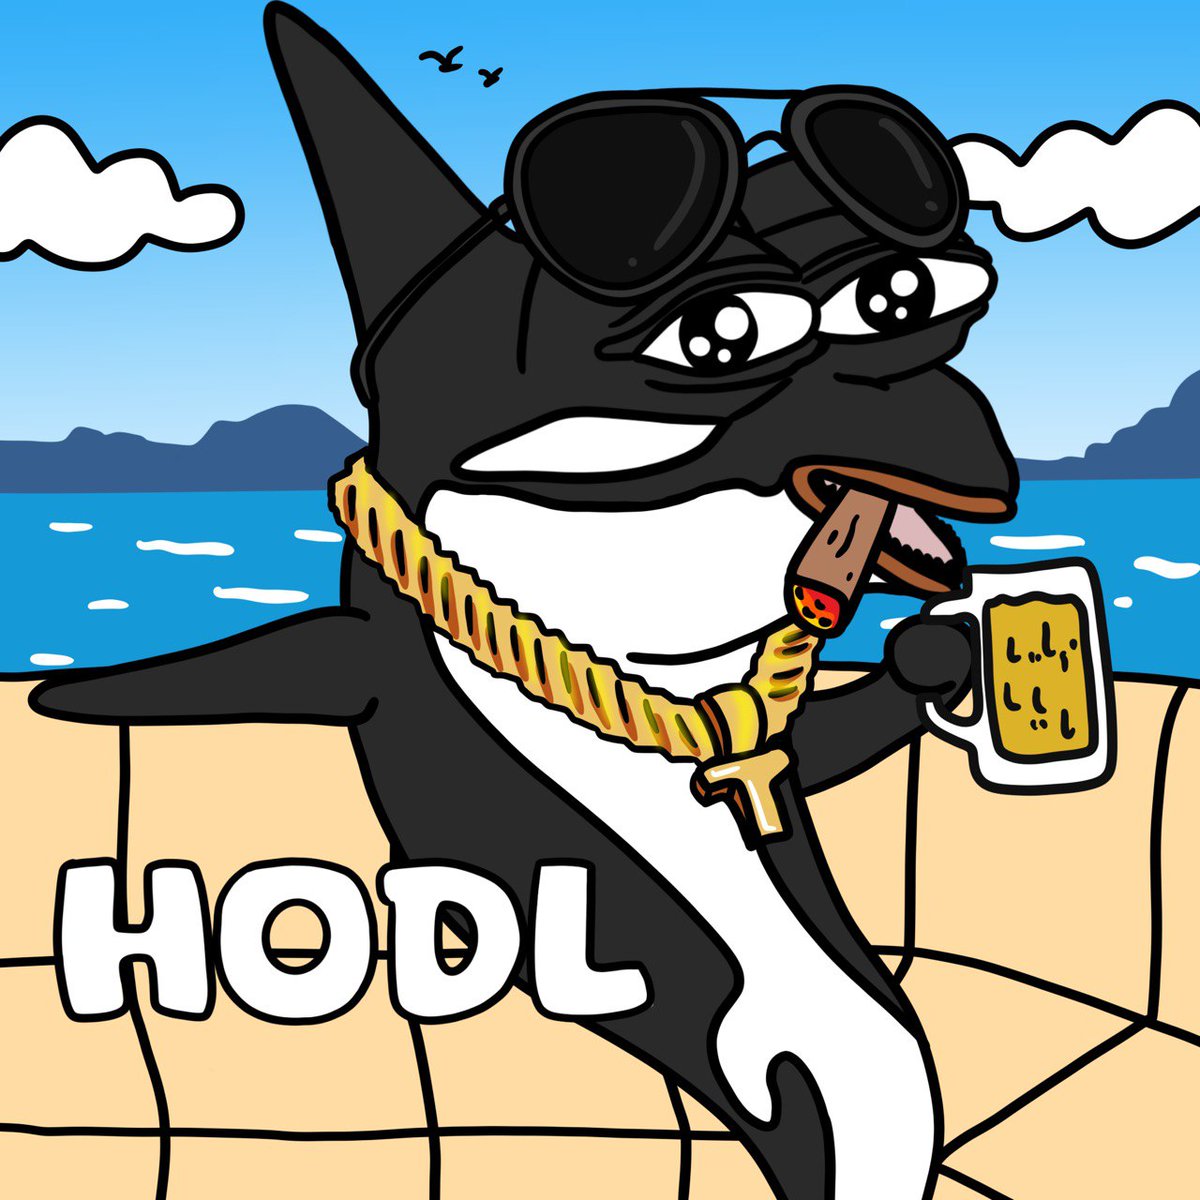 Buy and hold $TILLY to billies🐋💰

Manifesting that yacht life has never been easier🛥️